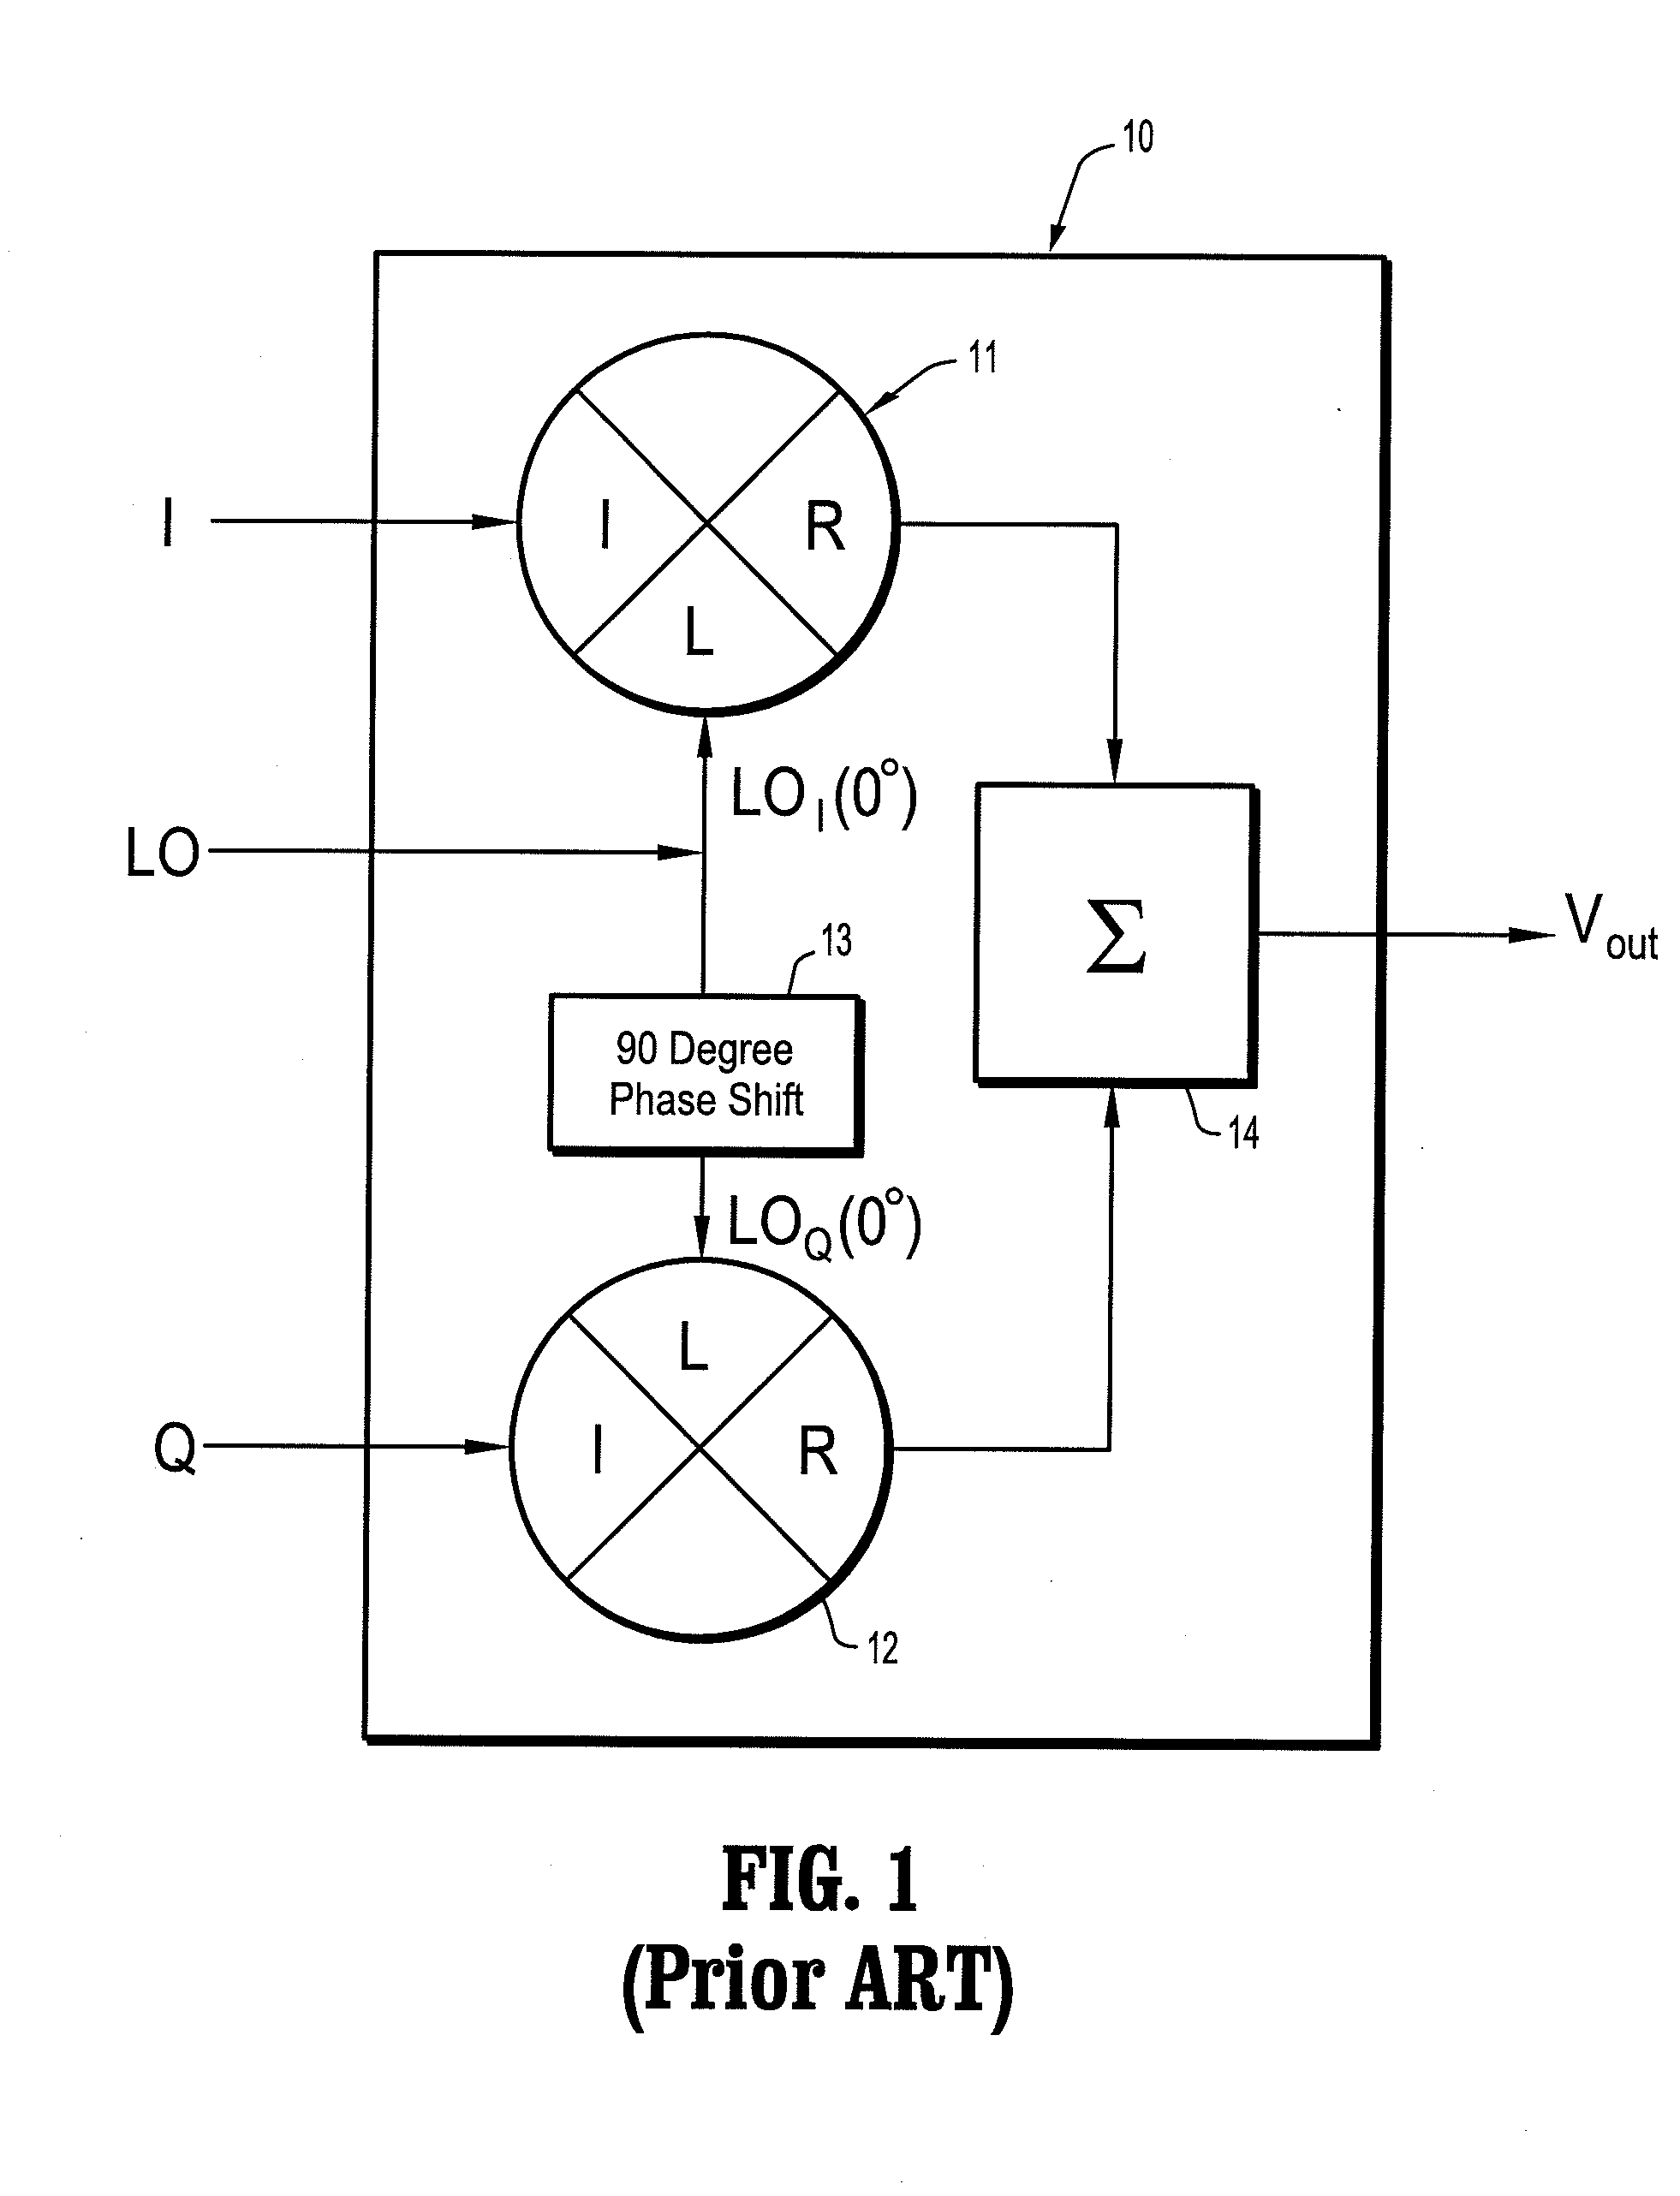 Quadrature modulation circuits and systems supporting multiple modulation modes at gigabit data rates